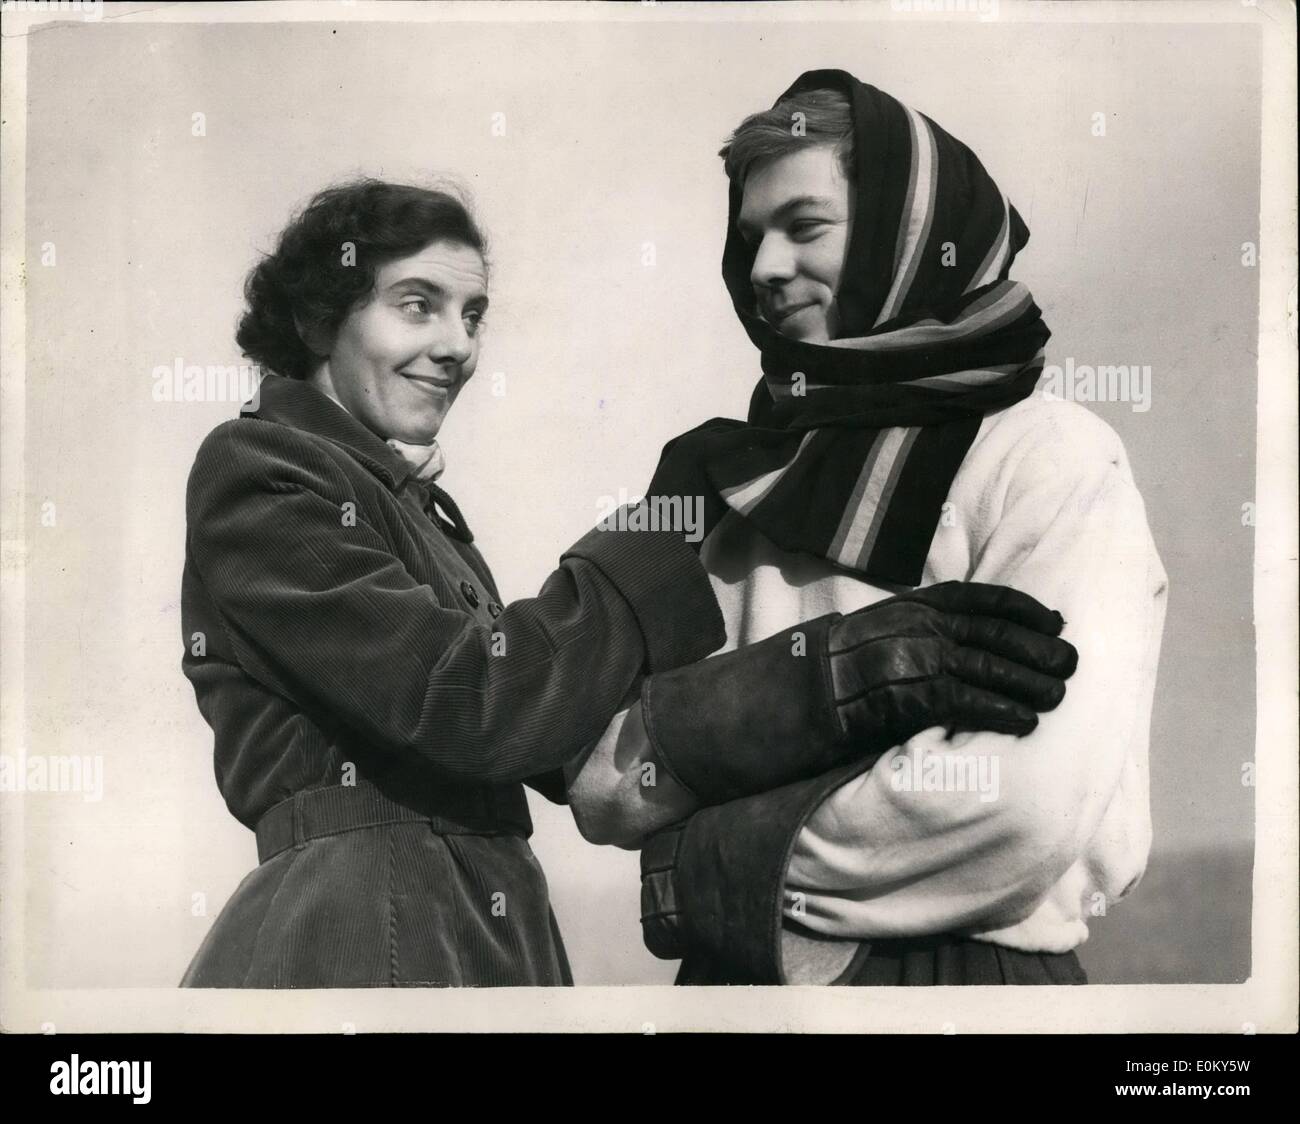 Nov. 11, 1952 - Hospitals Regatta at Putney. The Winning Cox: Forty two crews and scullers from London hospitals are taking part in their annual regatta being held on the Thames today from the Thames R.C. Boathouse at Putney. Photo shows Miss Hazel Bridget puts a scarf around the head of D.S. Porter (Cox) of the St. Thomas's Hospital crew which had just won their heat at Putney today. Stock Photo